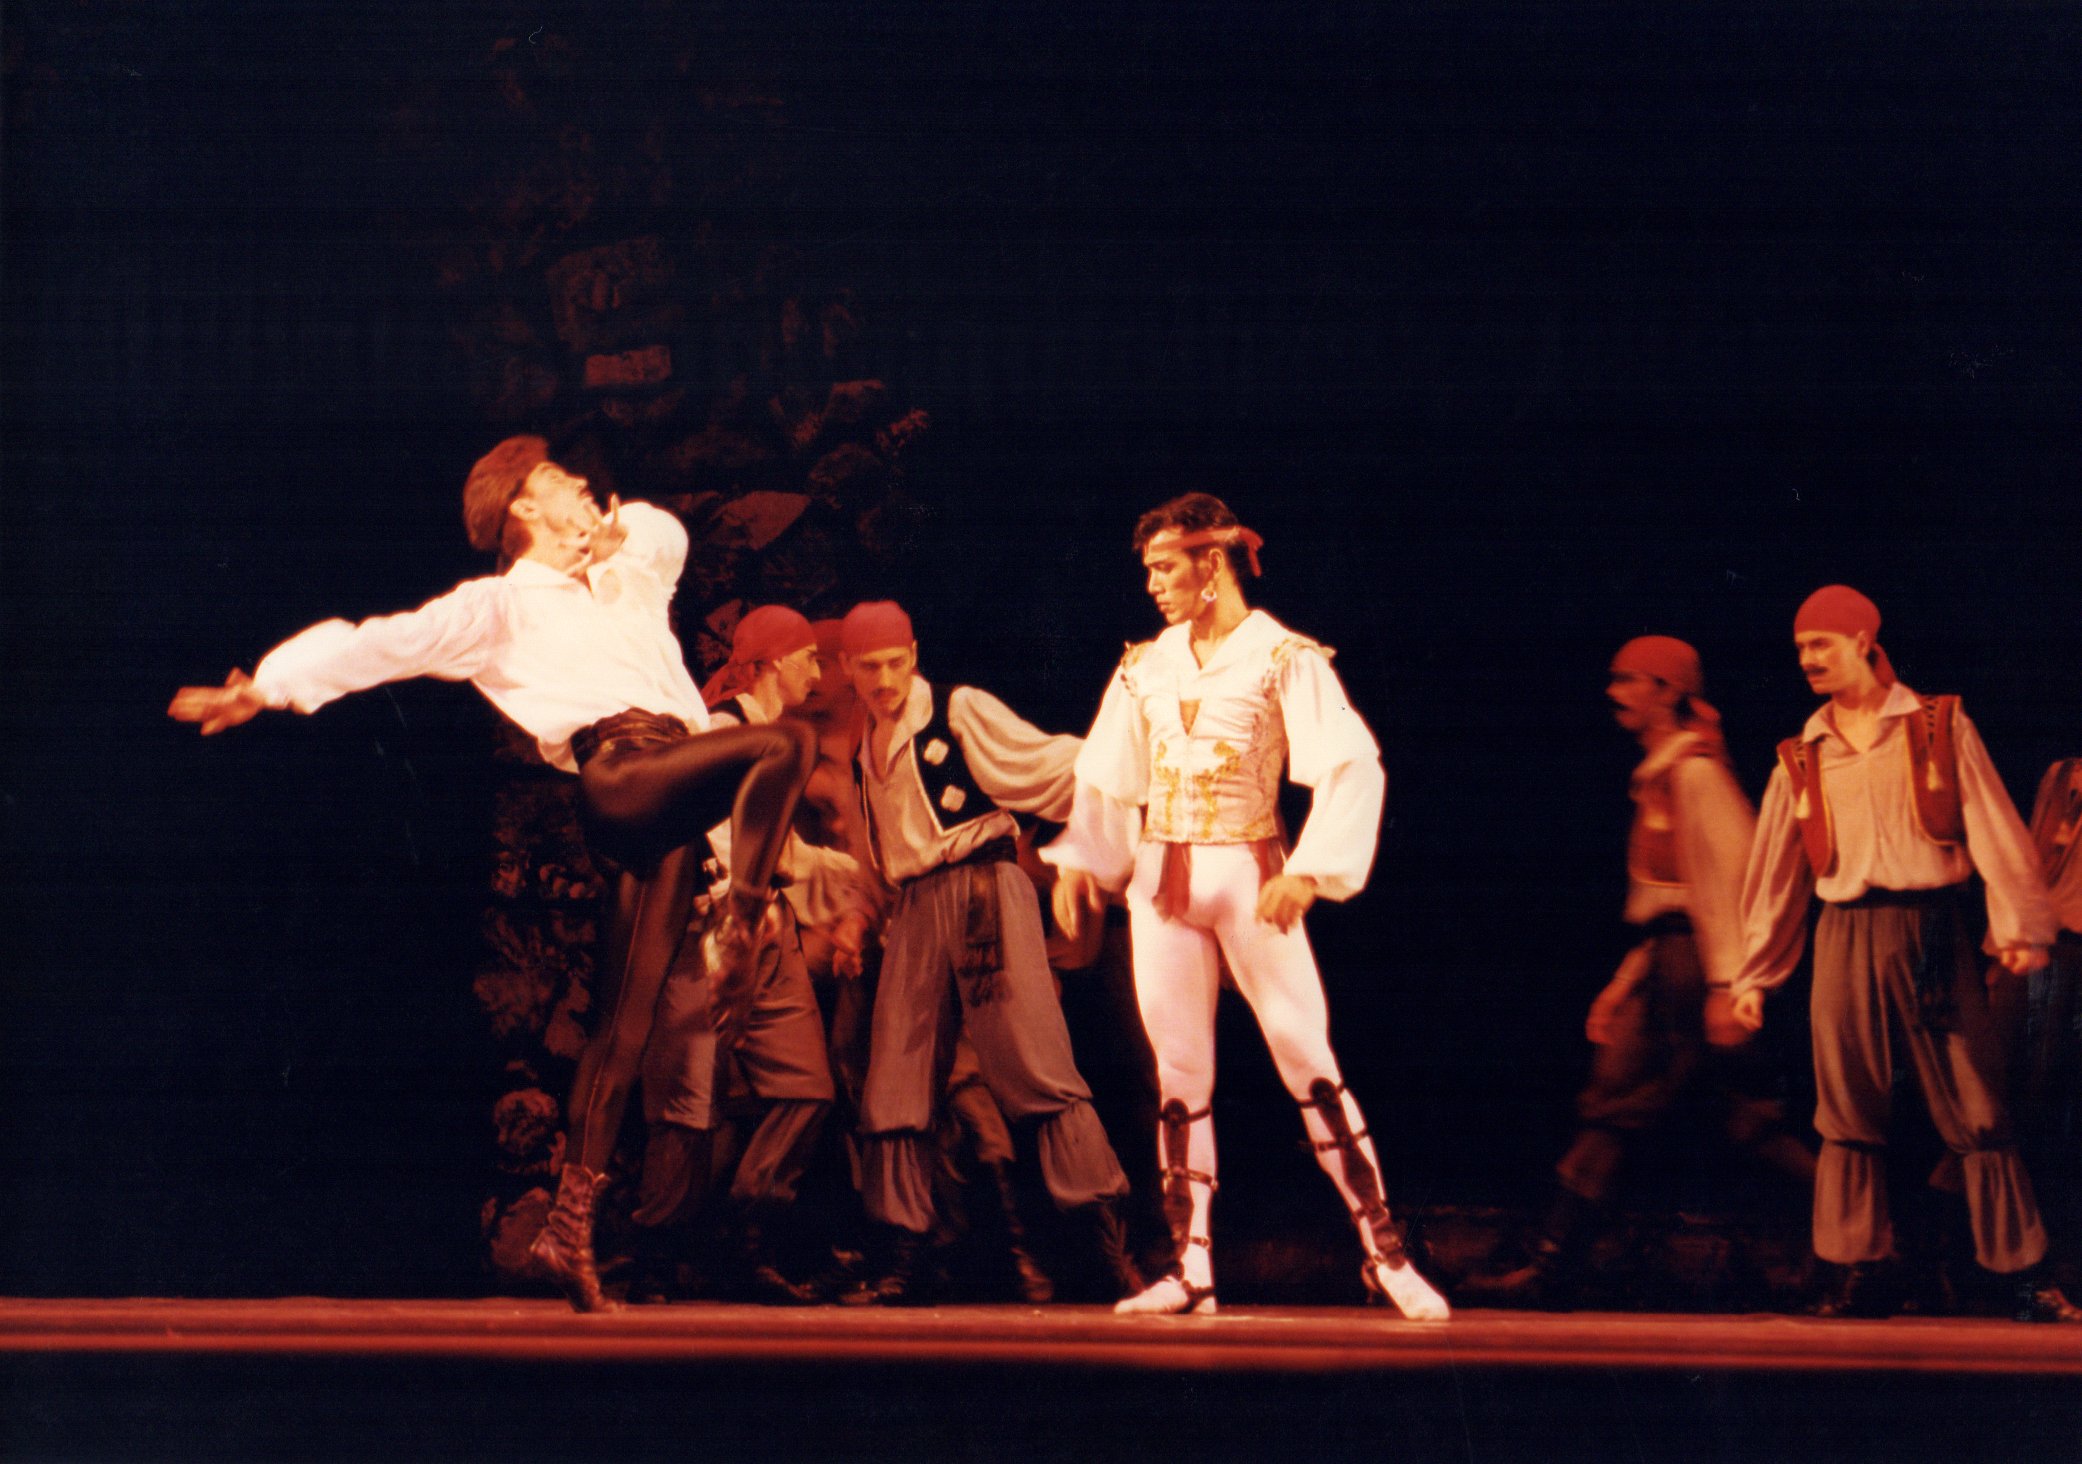    Osias Barroso Jr. made his debut as the lead character Conrad in  Le Corsaire i n 1998, supported by a Russian corps.   